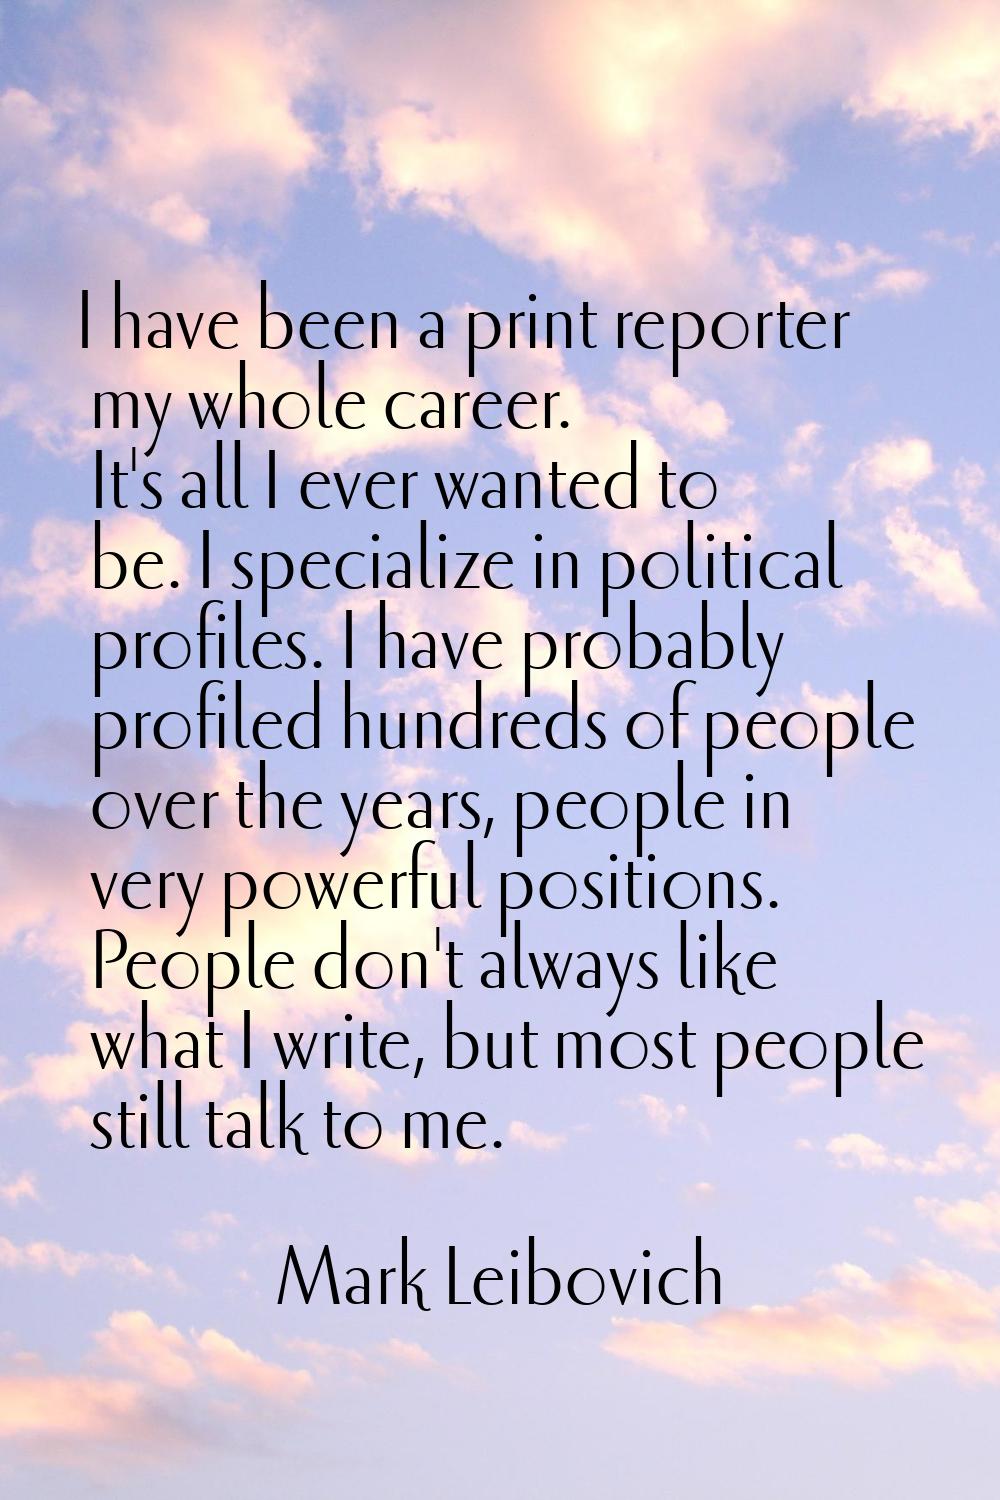 I have been a print reporter my whole career. It's all I ever wanted to be. I specialize in politic